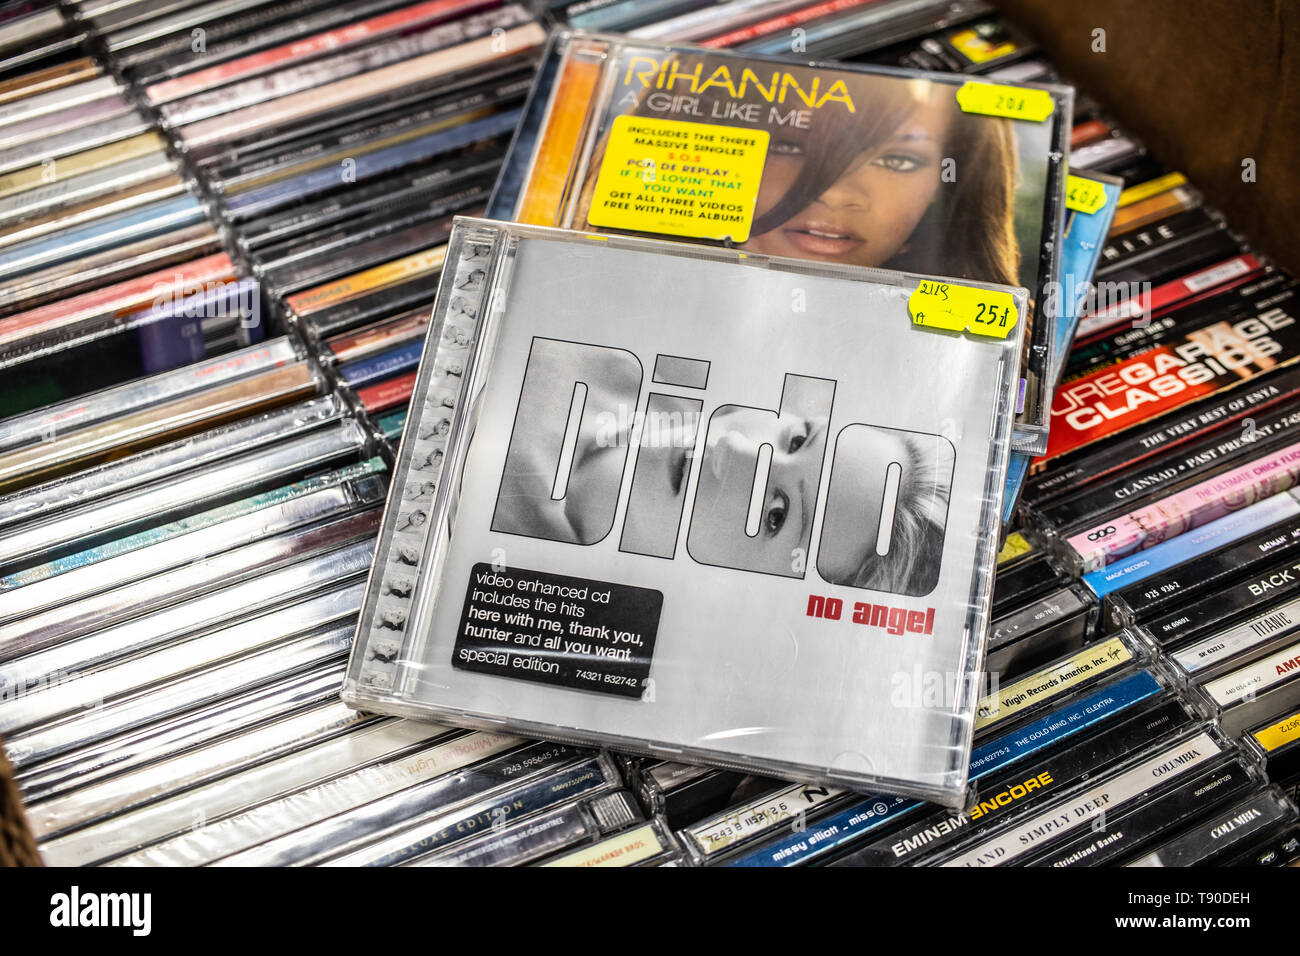 Nadarzyn, Poland, May 11, 2019: Dido CD album No Angel 1999 on display for  sale, famous English singer and songwriter, collection of CD music albums  Stock Photo - Alamy